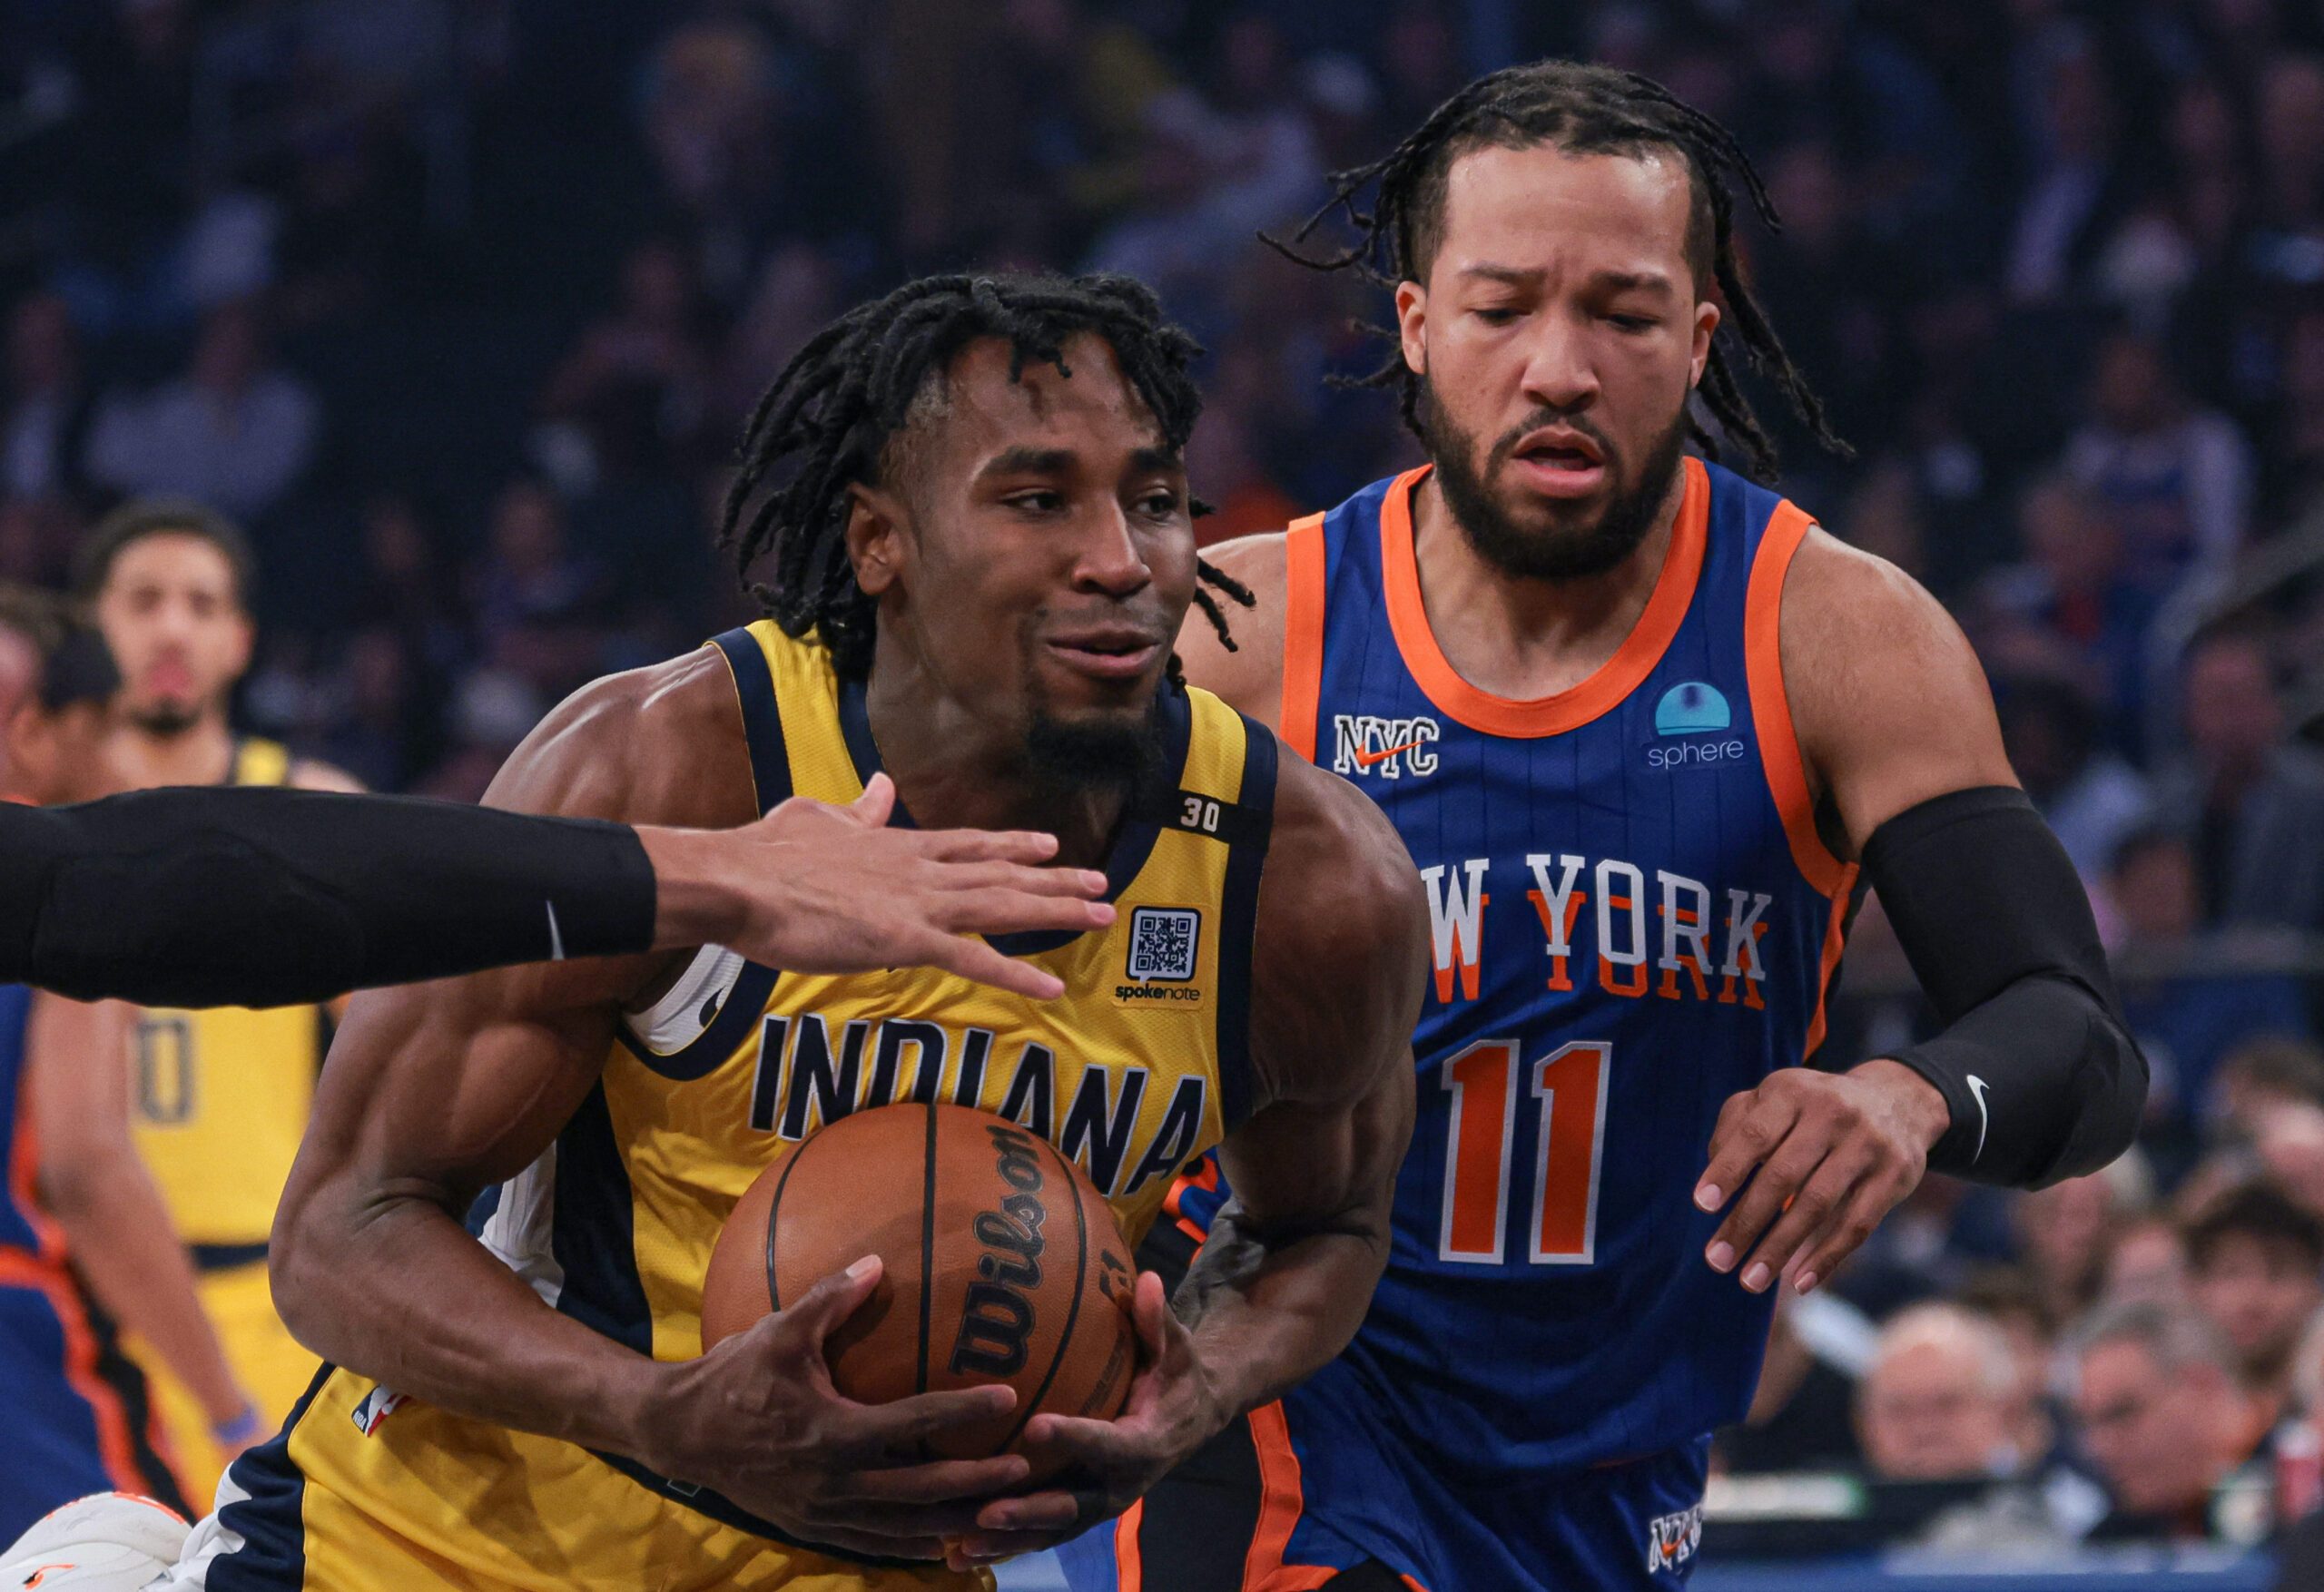 New York trademark: High-energy Knicks pound Pacers as Brunson erupts for 44